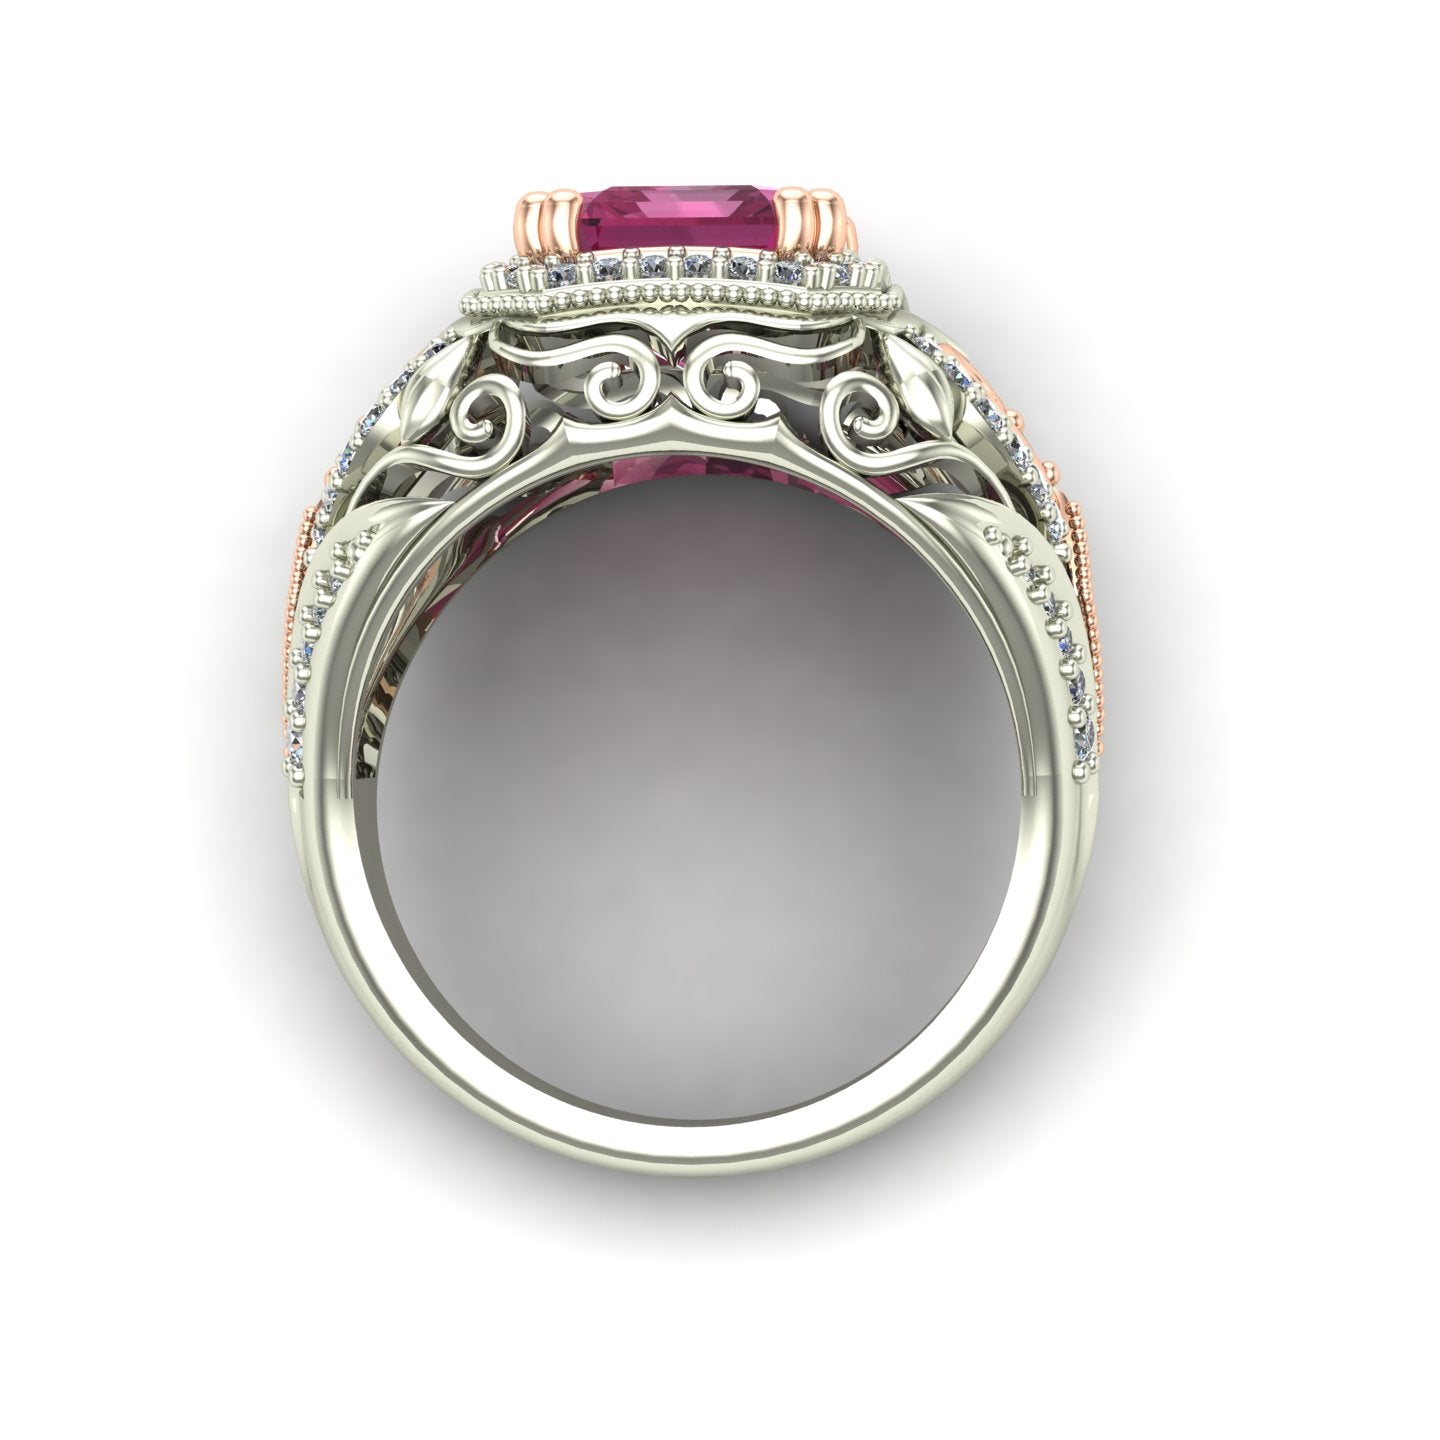 emerald cut pink tourmaline and diamond two tone dome ring in 14k rose and white gold - Charles Babb Designs - through finger view